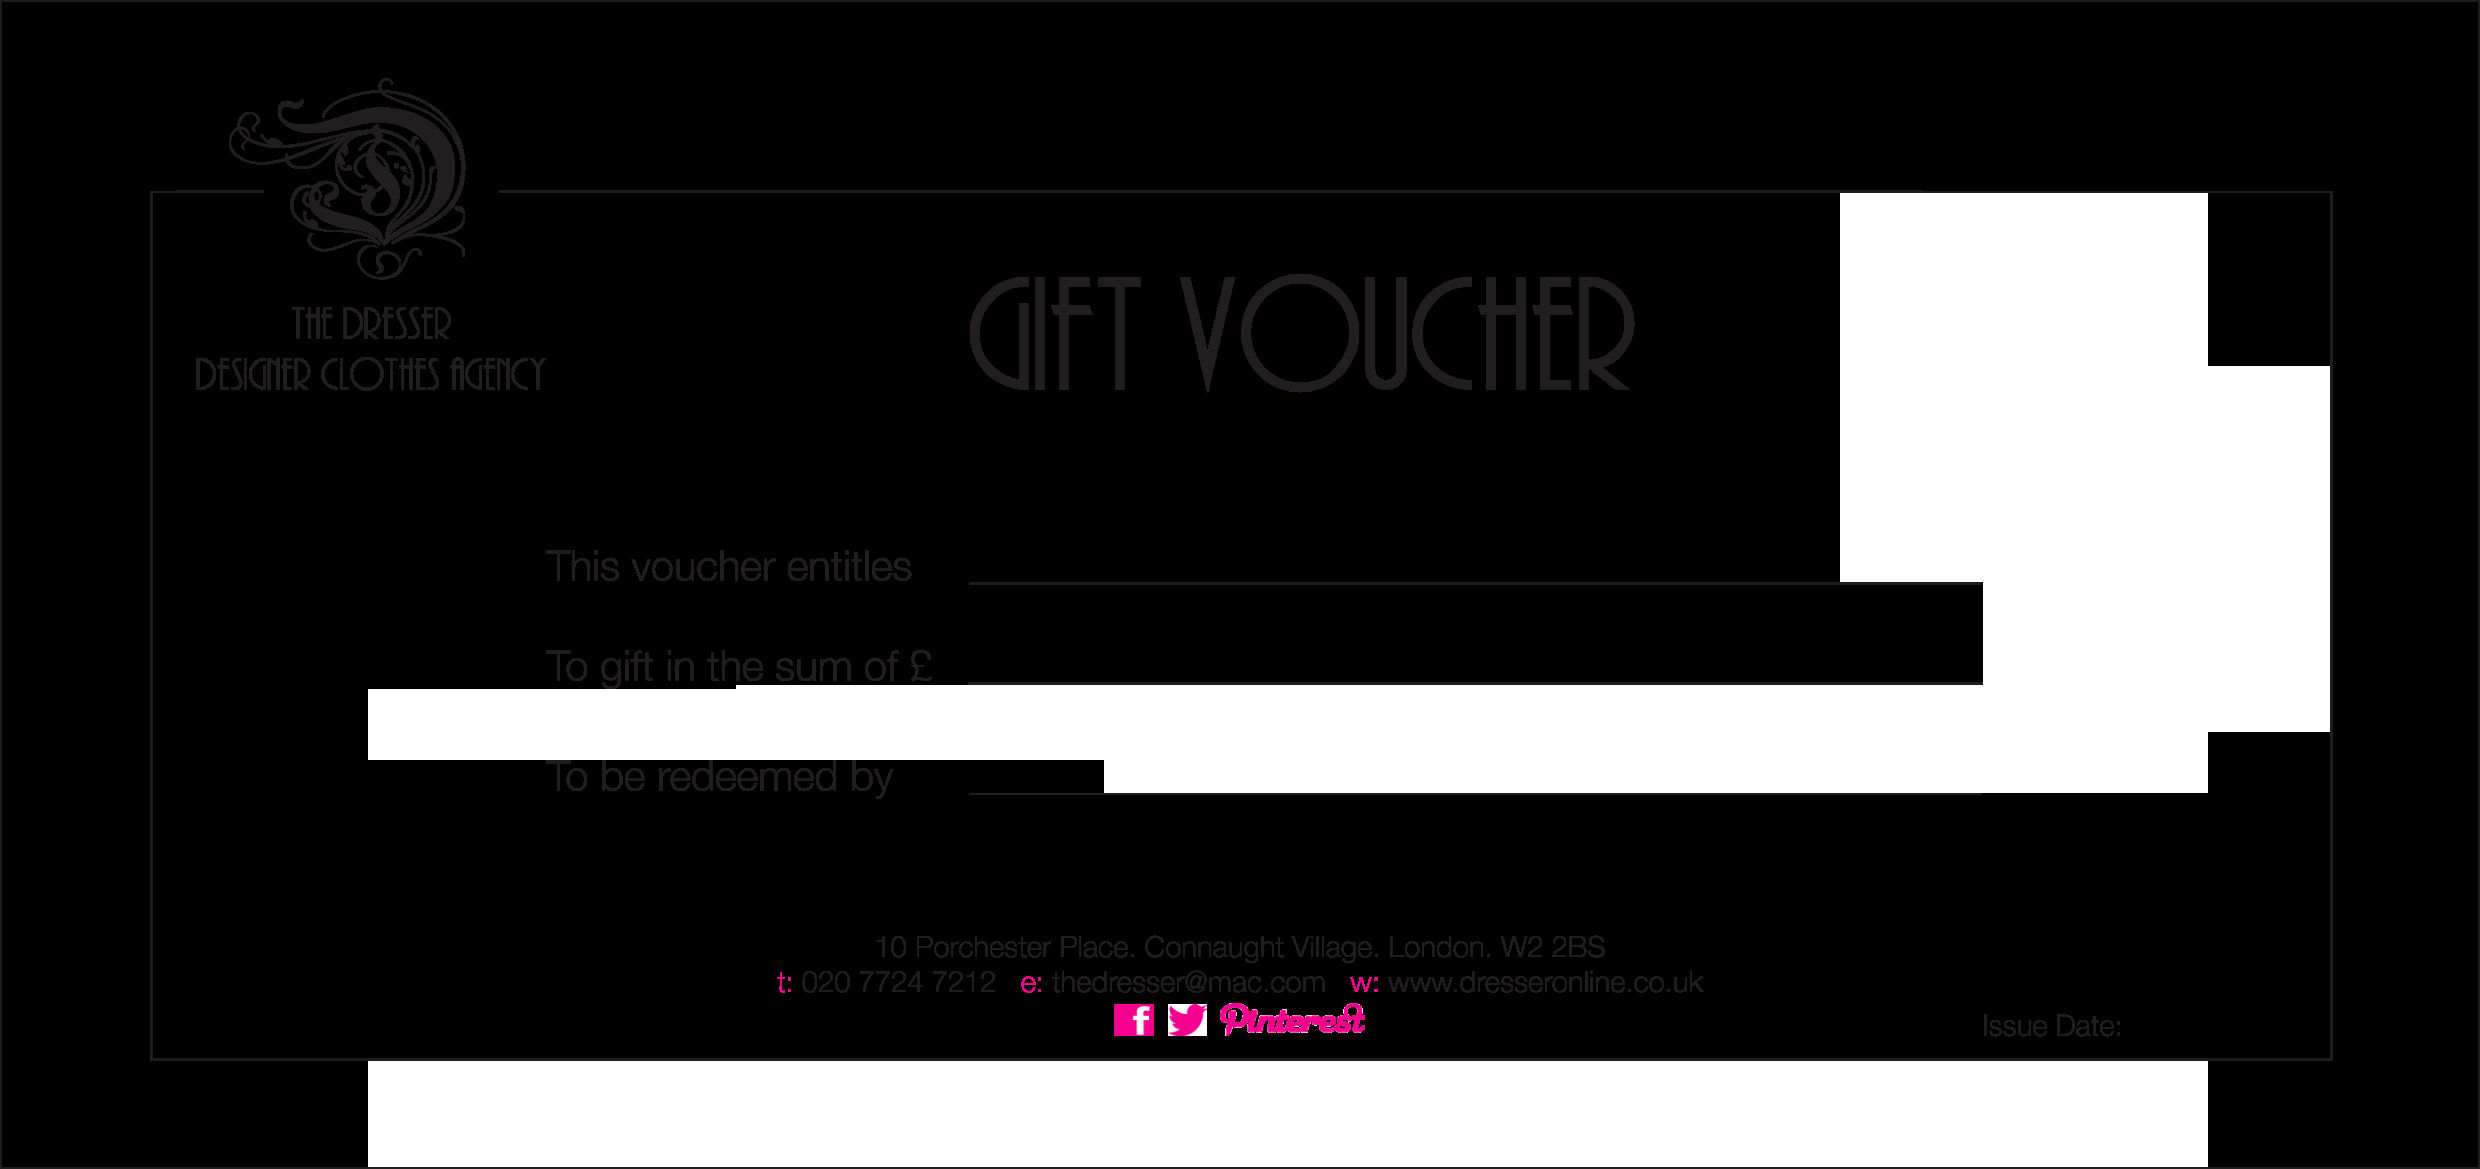 Free Gift Card Template Download Lovely Gift Voucher Template Word Free Download